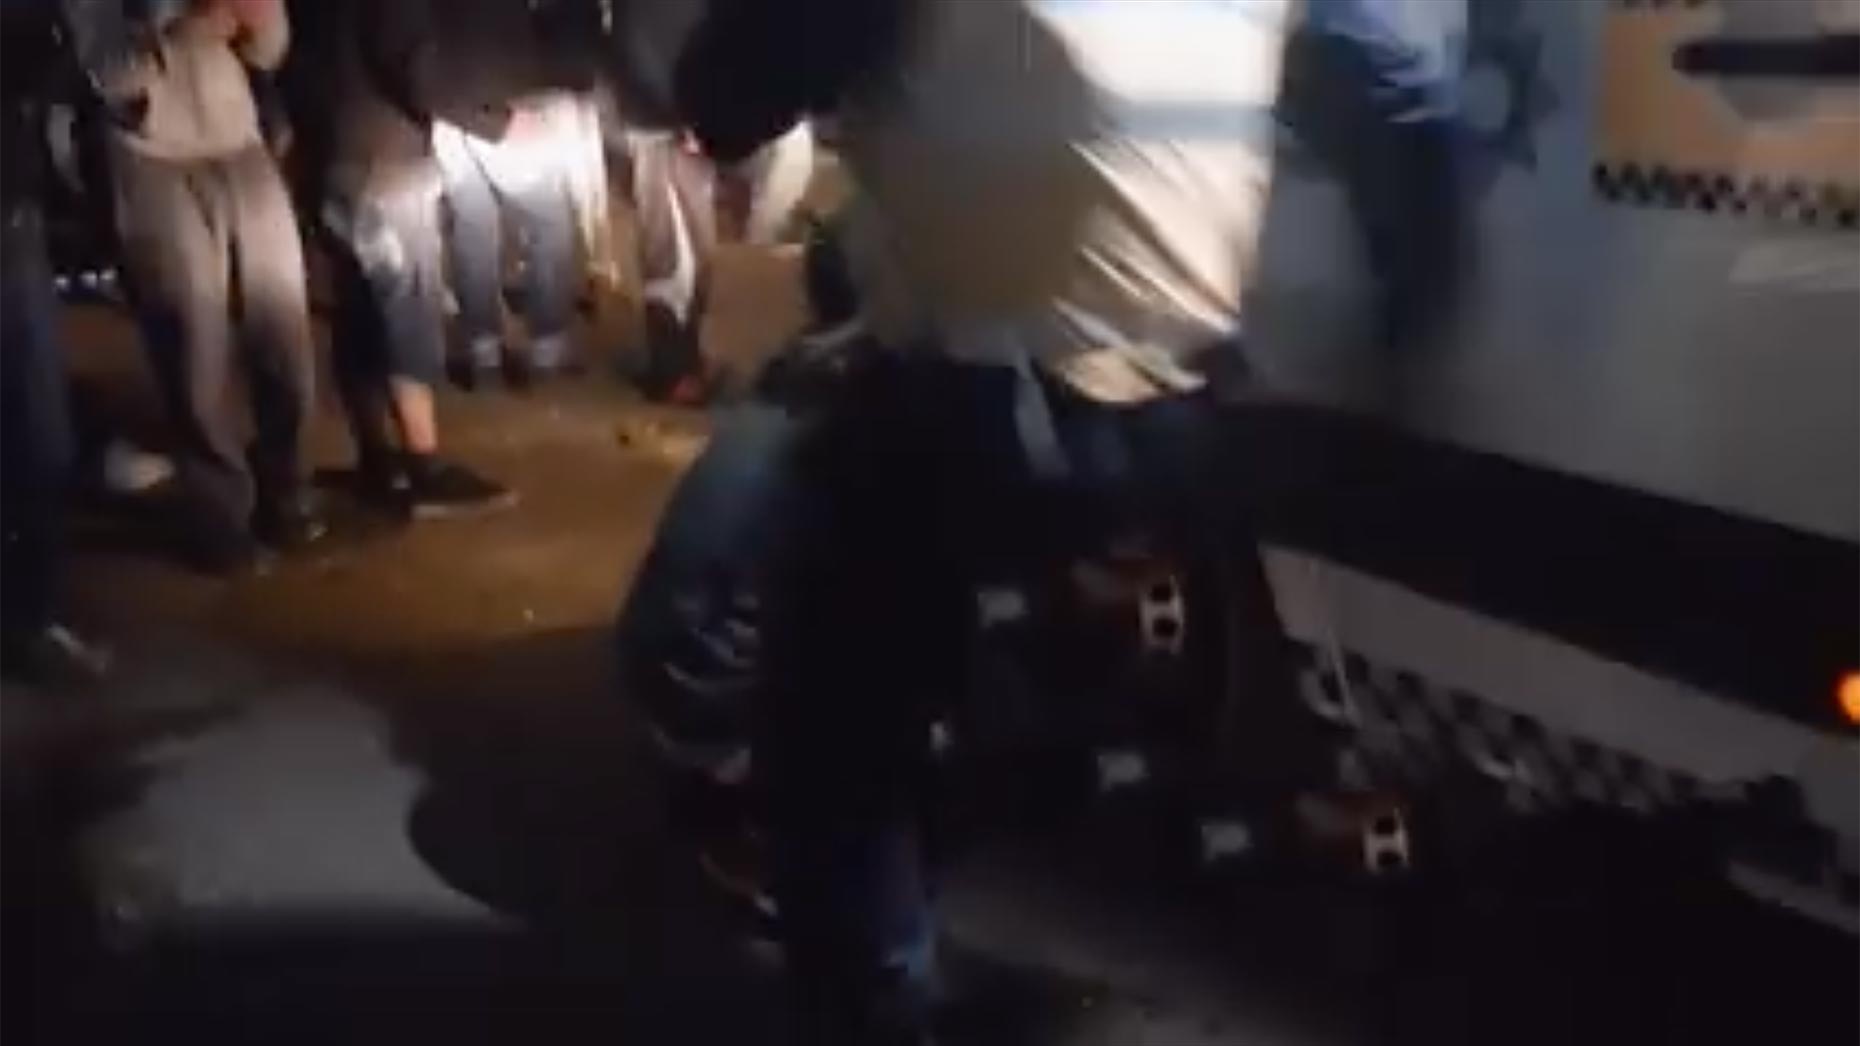 Back at the riot van where the man is deflating a tyre, an officer swoops in and appears to kick the man. Screenshot: Chris Shaw